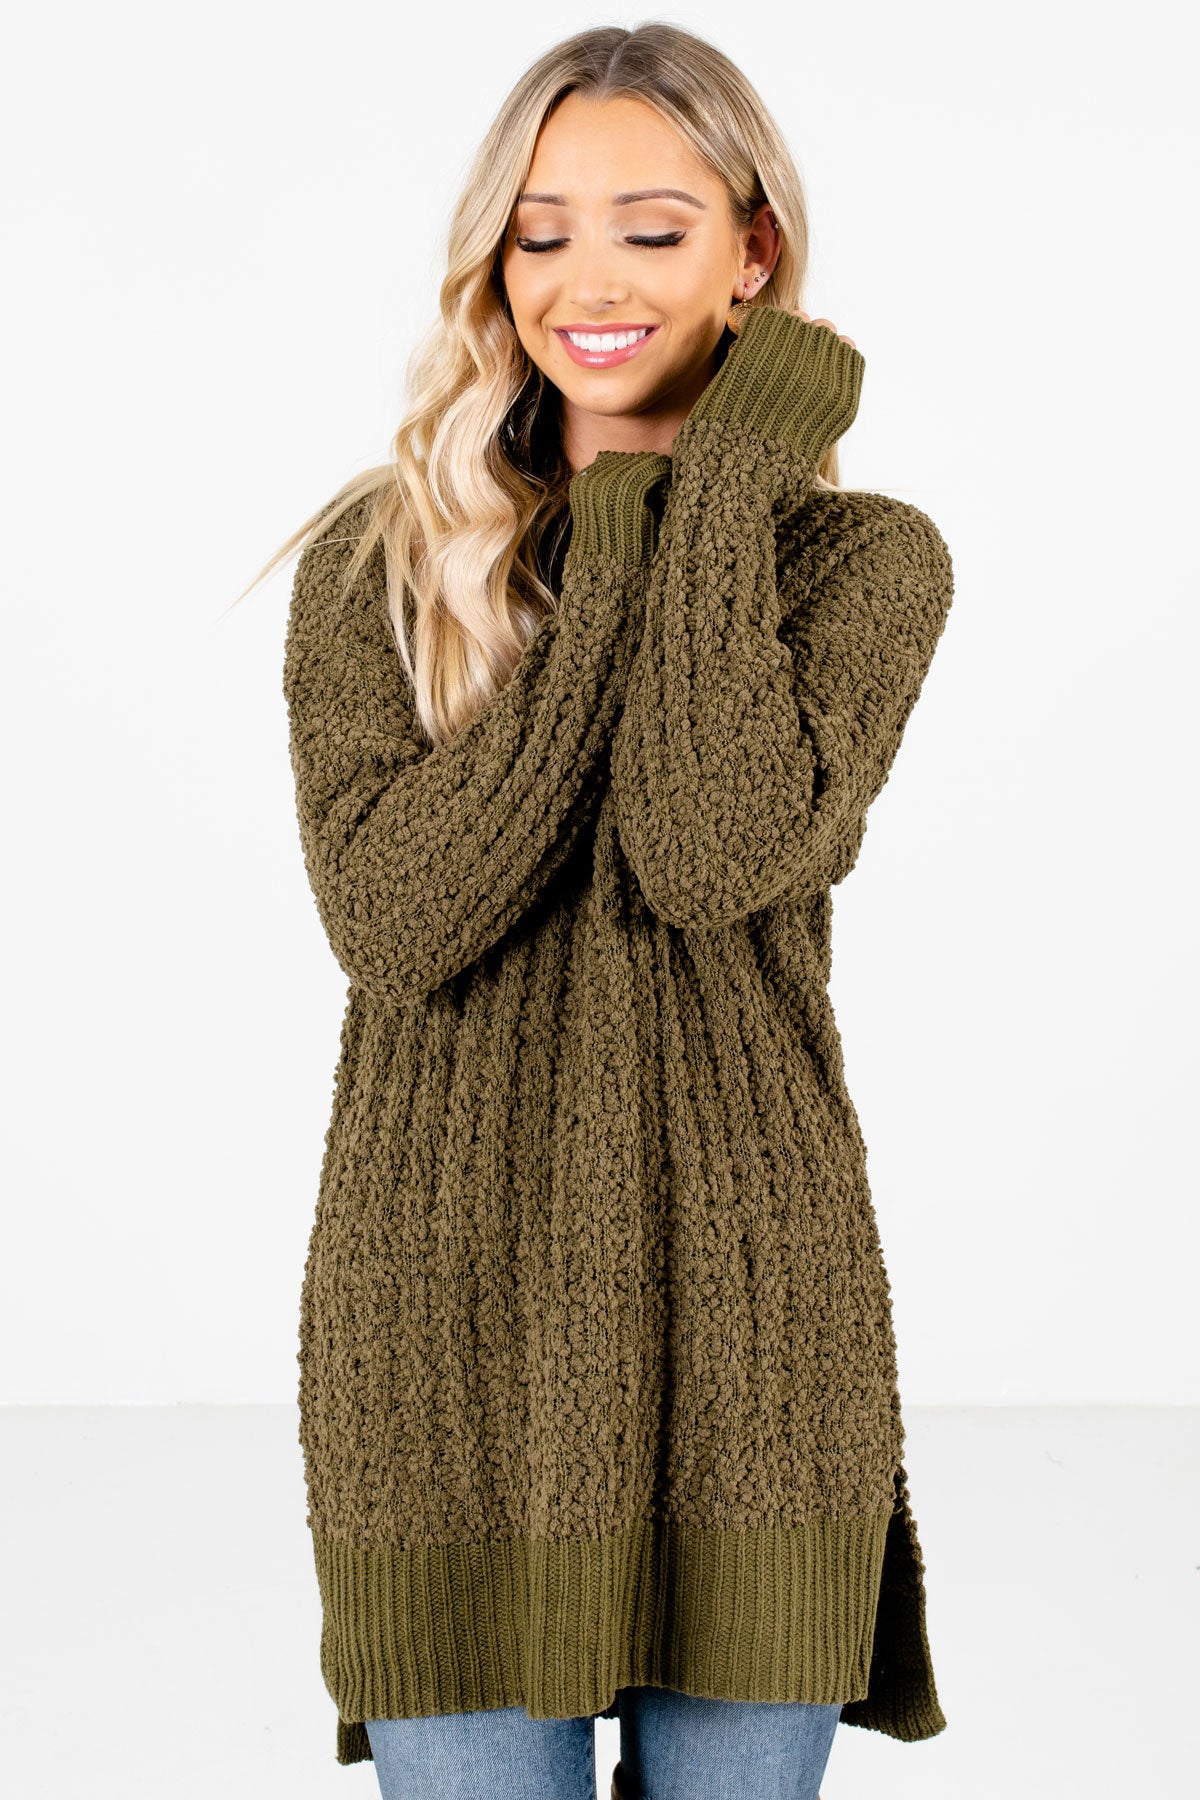 Women’s Olive Green Warm and Cozy Boutique Sweaters